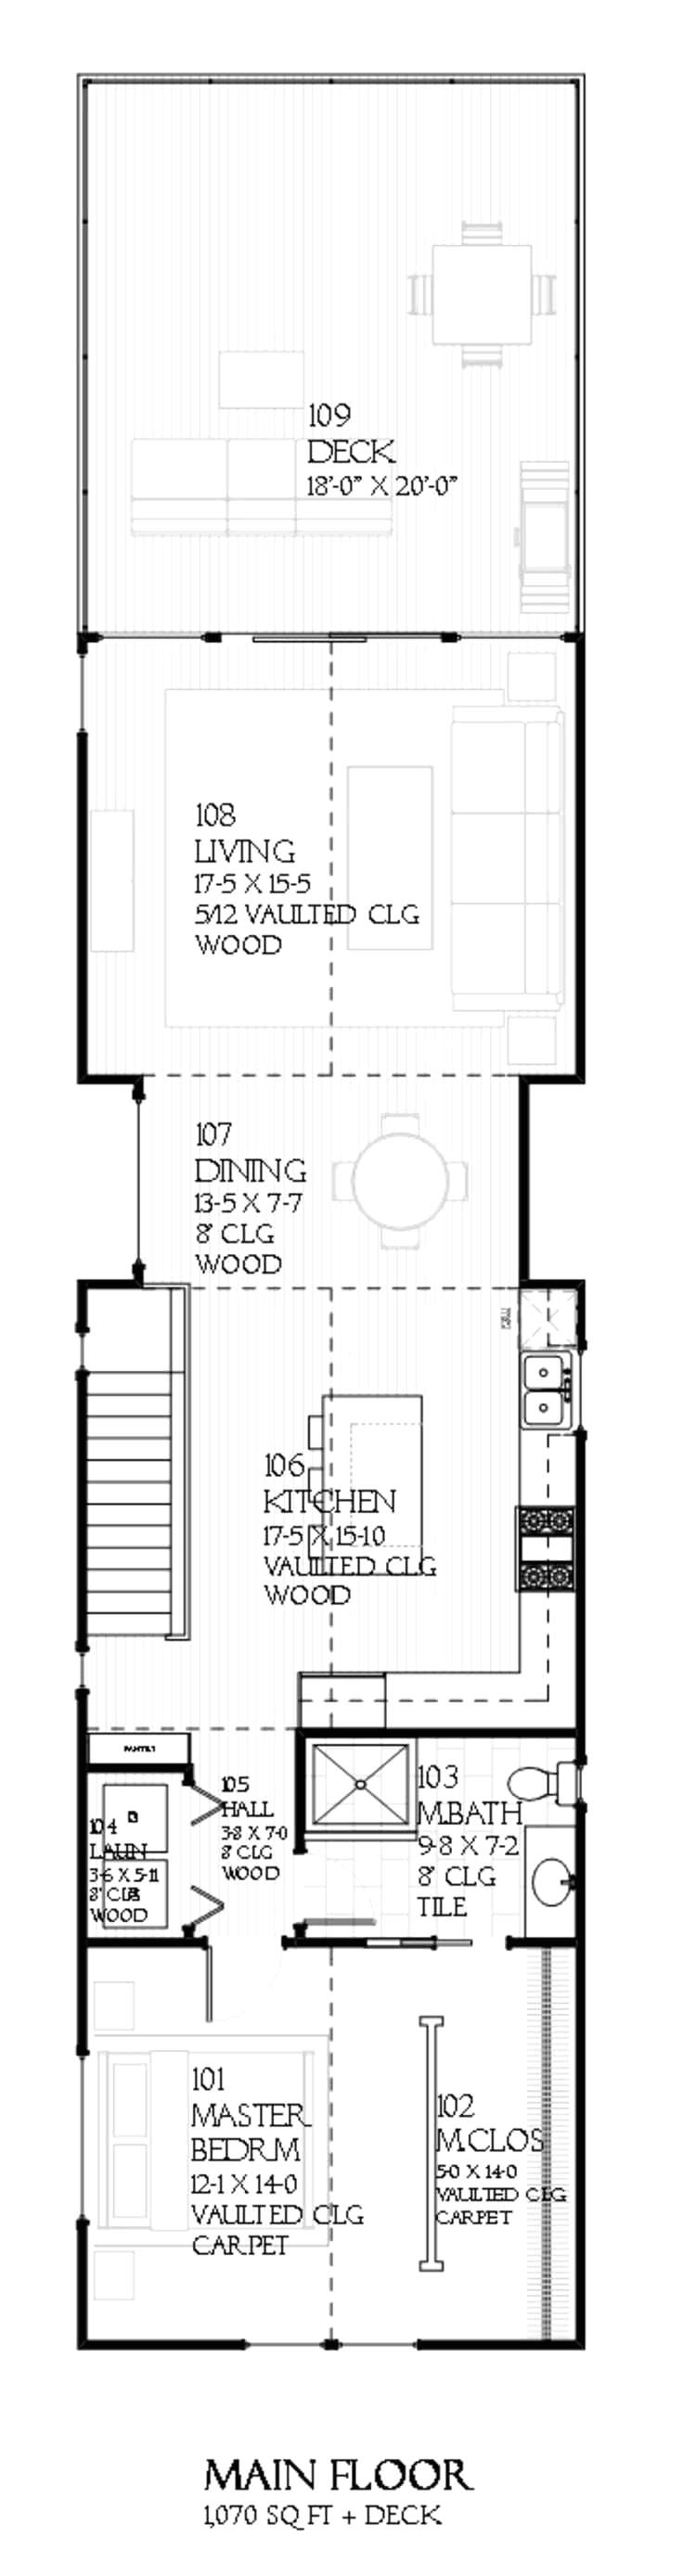 20 x 40 house floor plans lovely home plans with inside beautiful 40 x 40 house